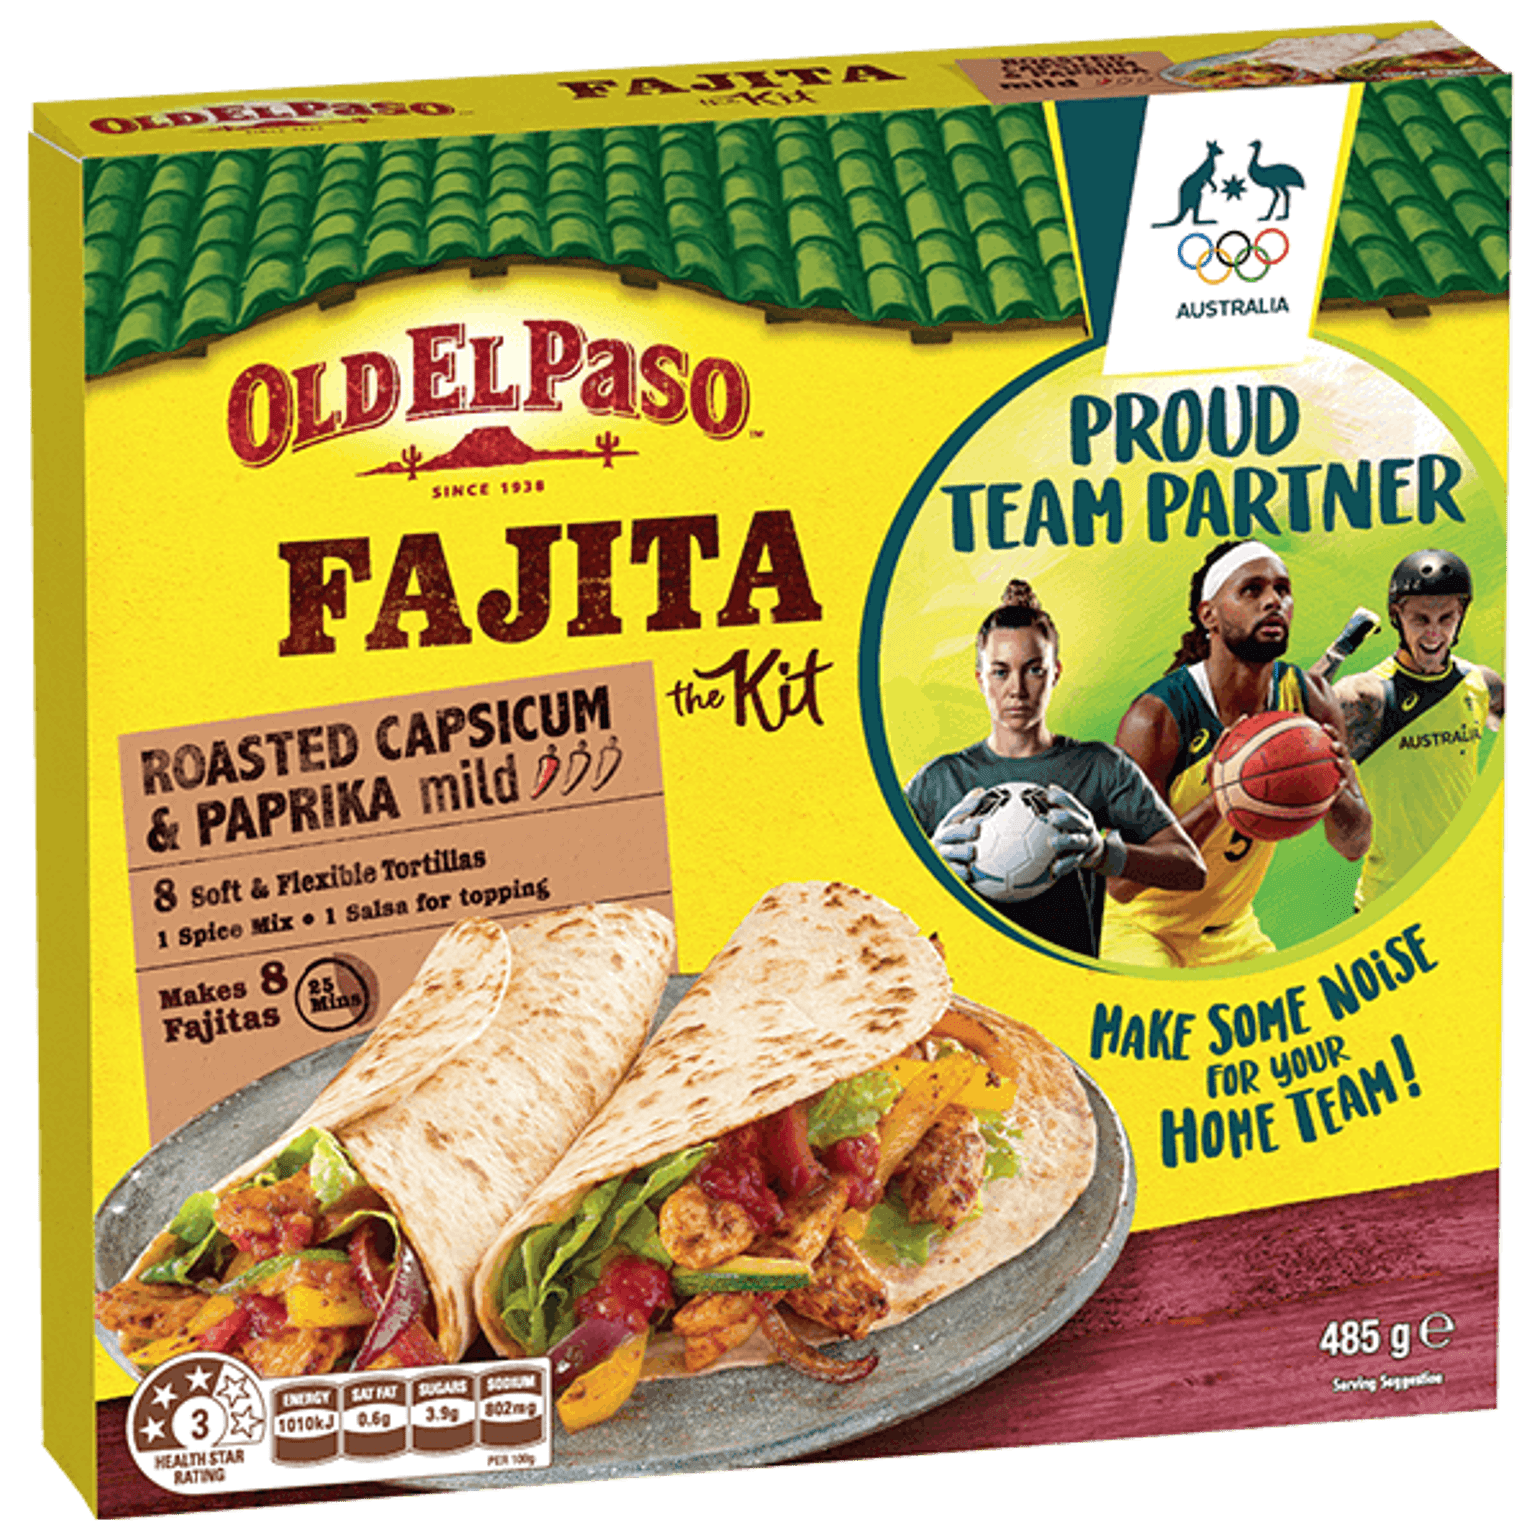 a pack of Old El Paso's roasted capsicum & paprika mild fajita kit containing tortillas, spice mix & salsa for topping (485g)